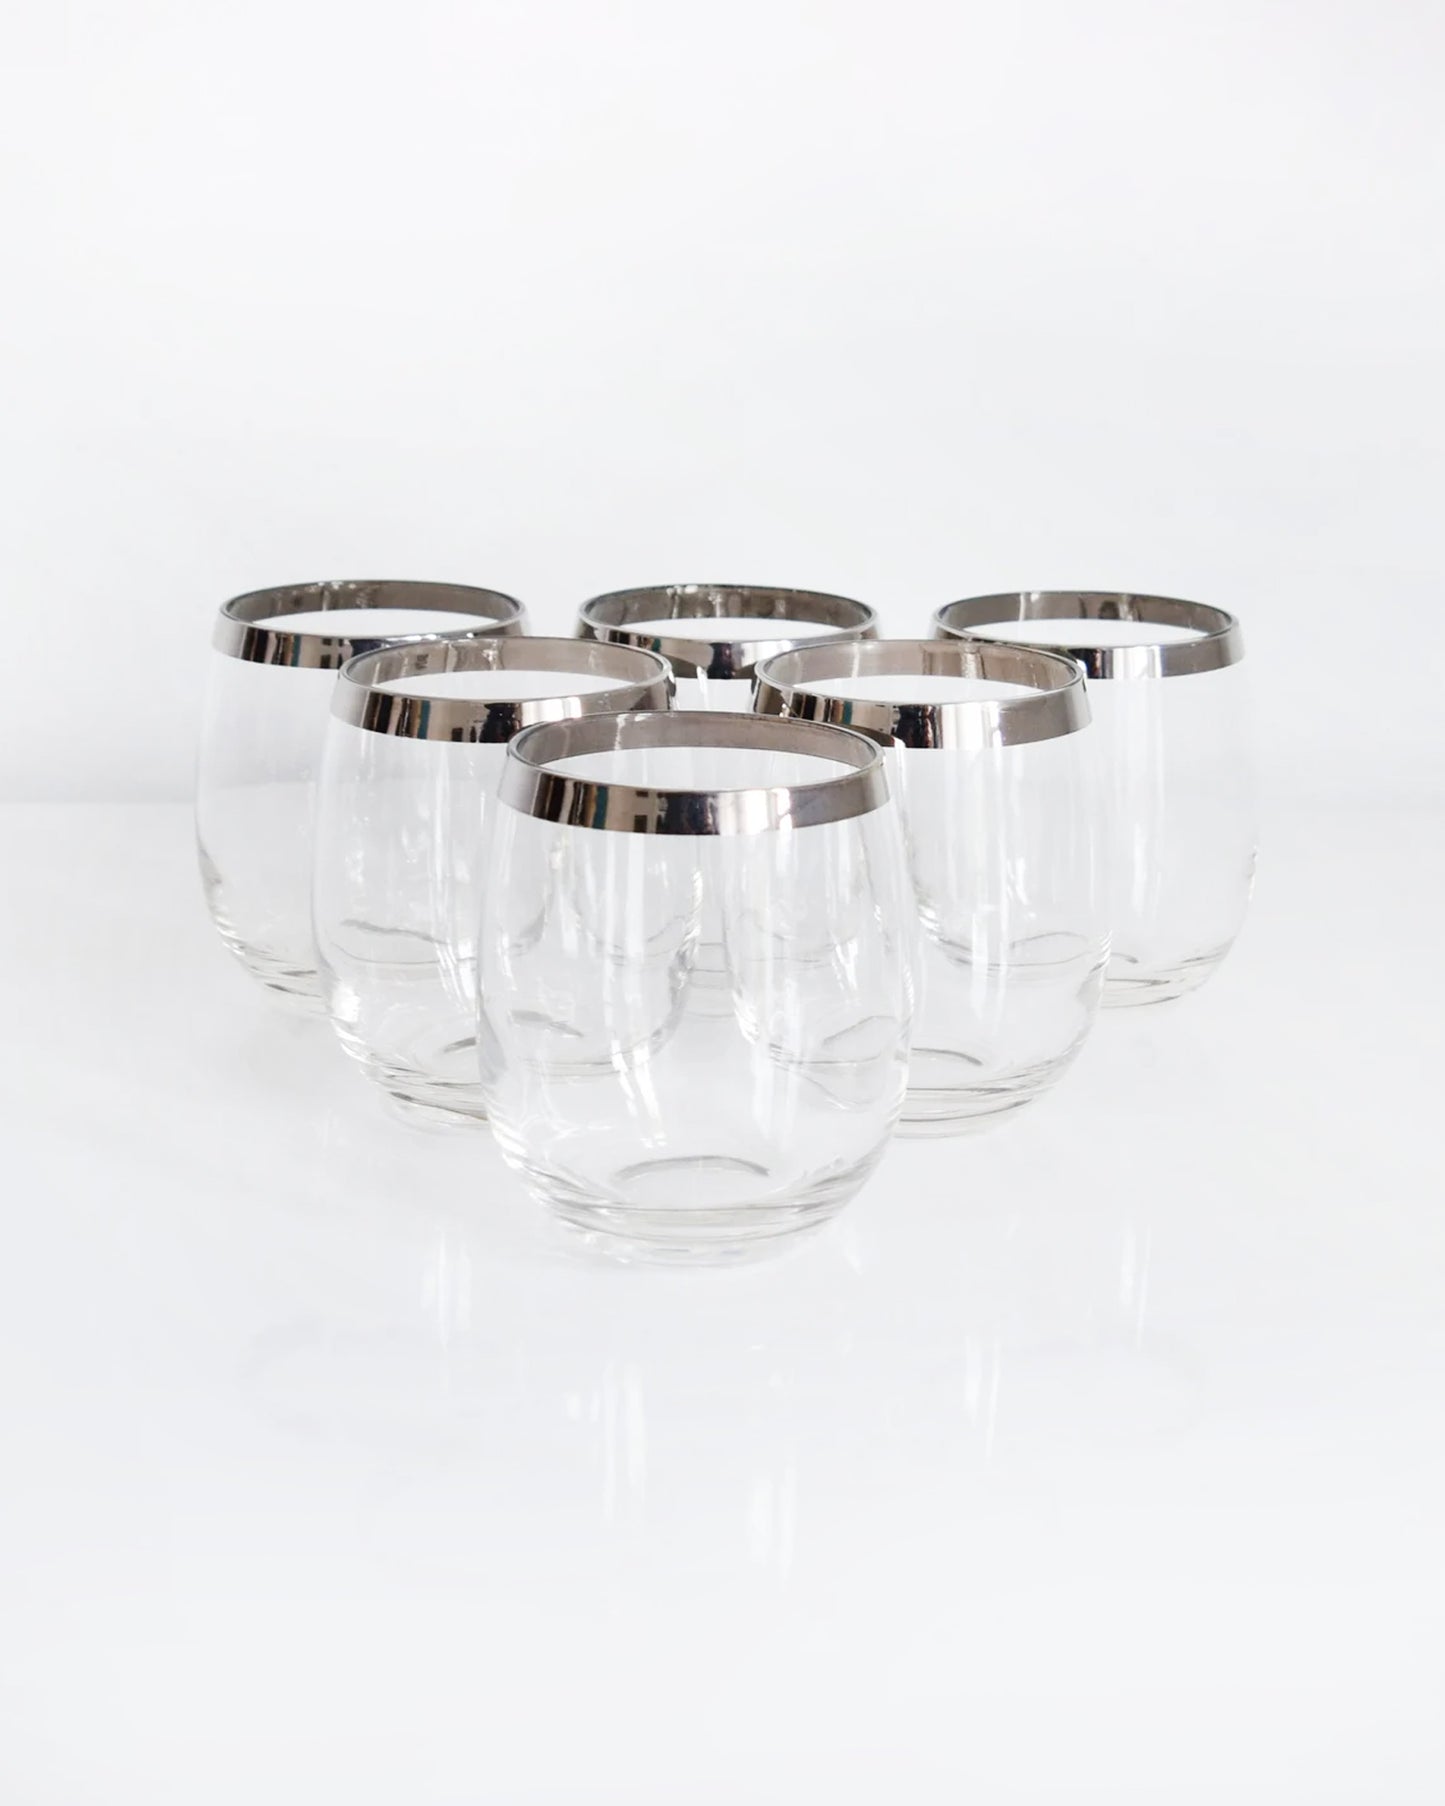 A set of 6 vintage 60s sliver rim tumblers that have an elongated roly poly shape